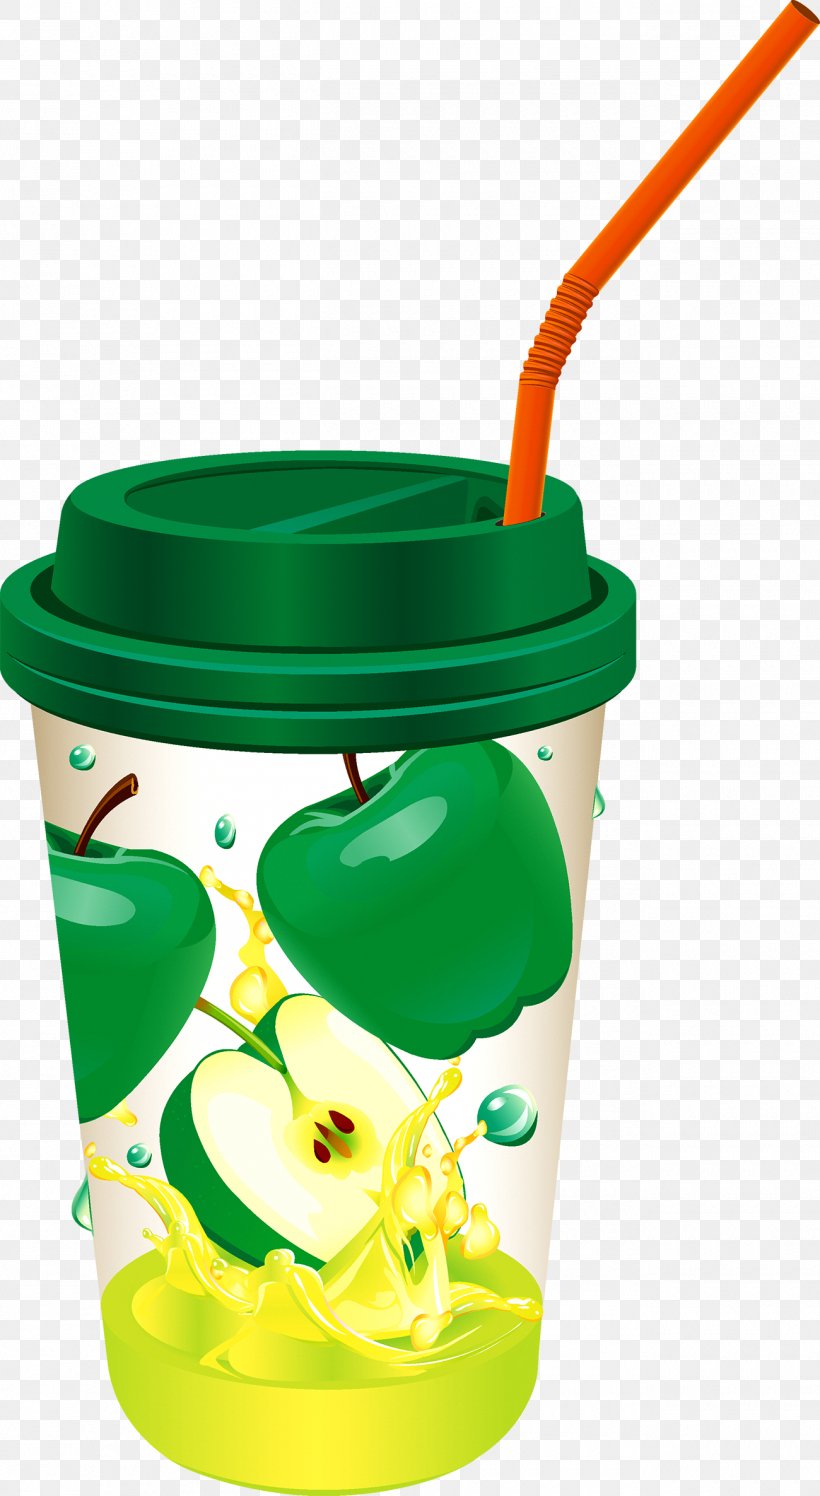 Apple Juice Coffee Cup Drink Packaging And Labeling, PNG, 1300x2372px, Juice, Apple, Apple Juice, Coffee Cup, Cup Download Free